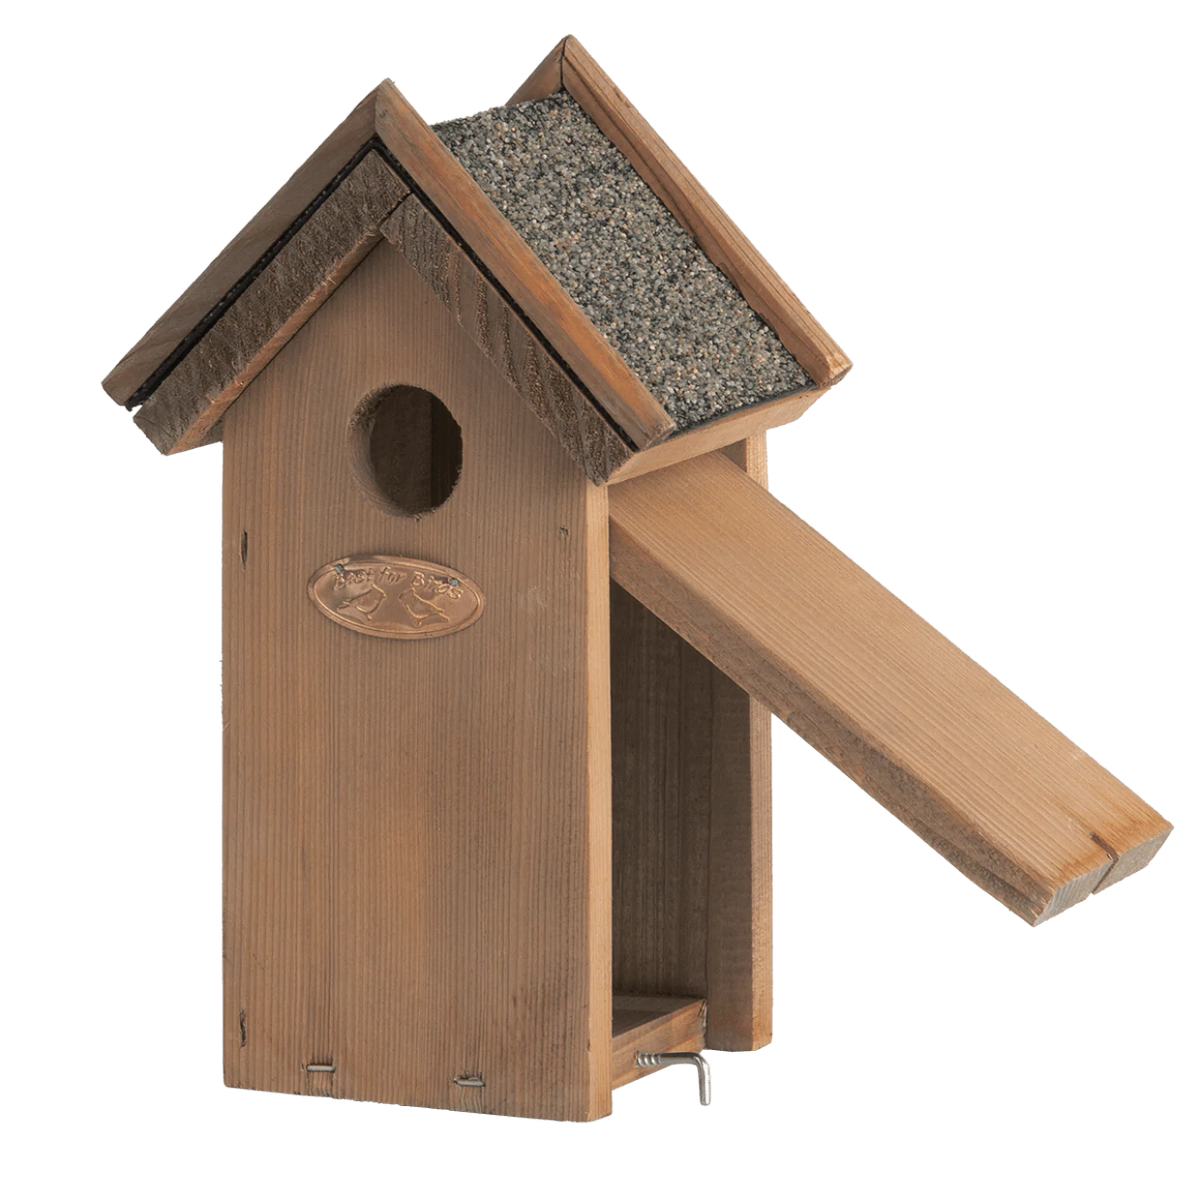 Connecting to Nature Nest Box with Bitumen Roof